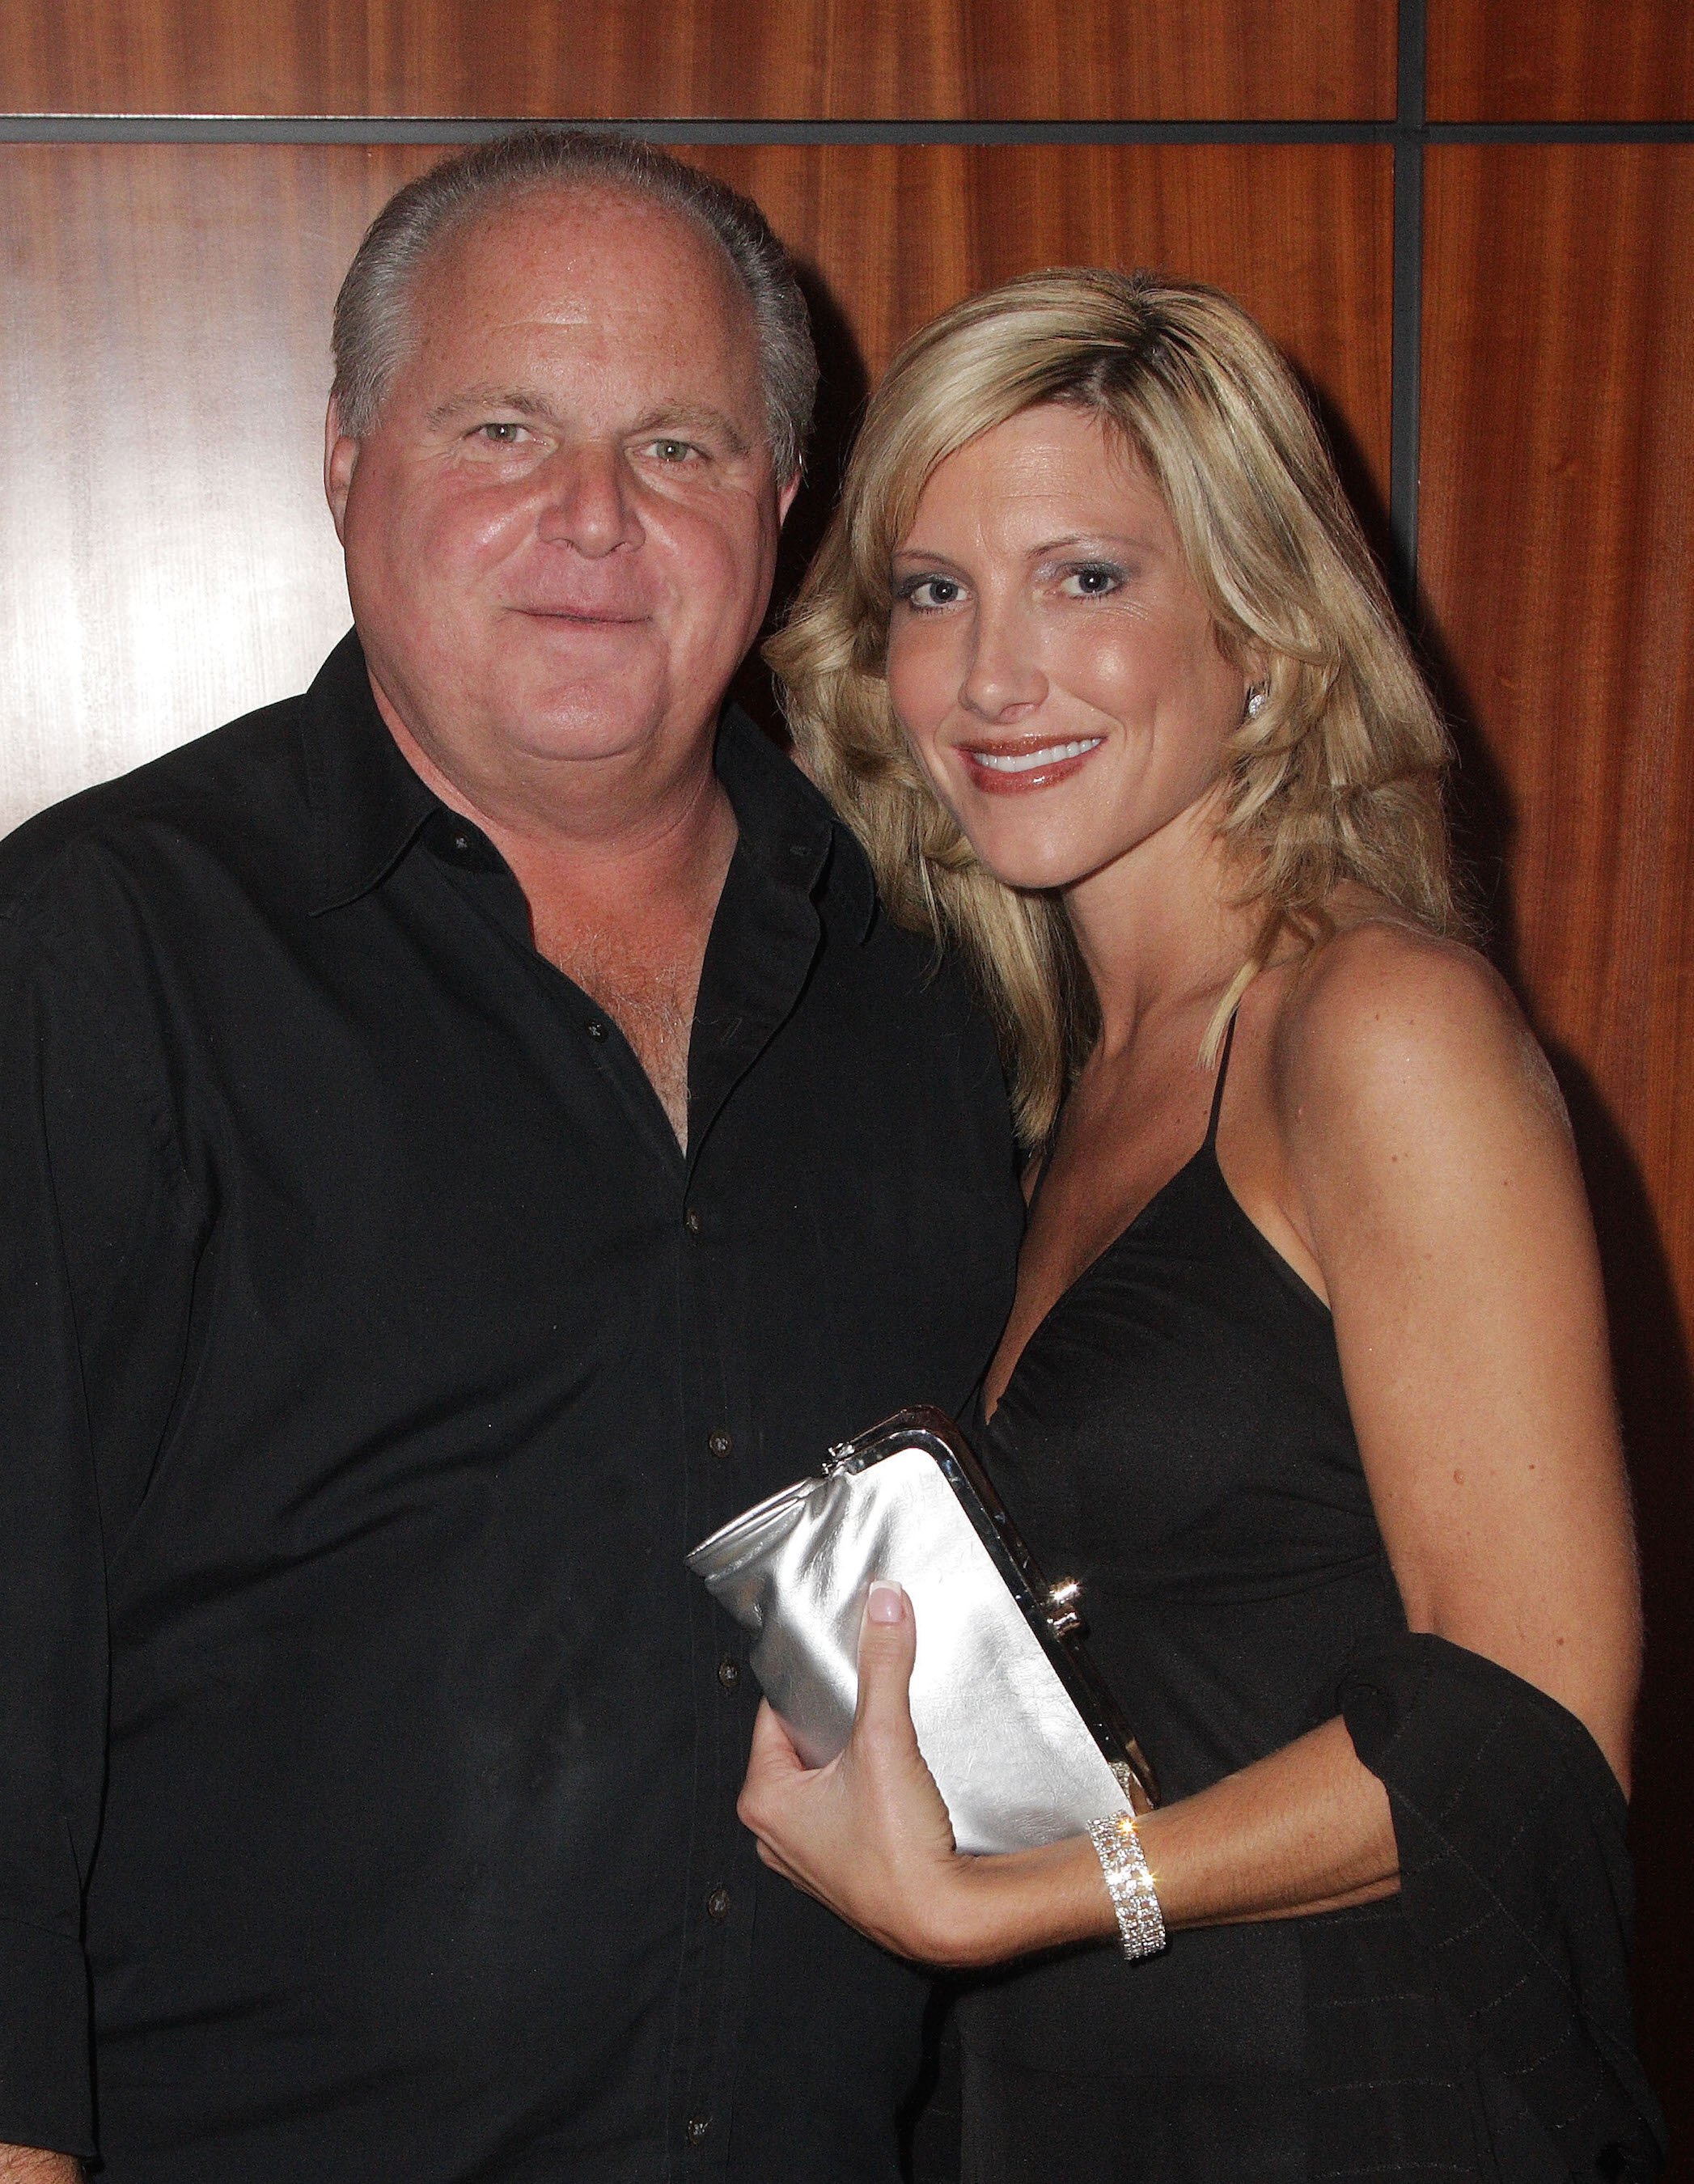 Rush Limbaugh and wife Kathryn Adams Limbaugh dressed up at a gala